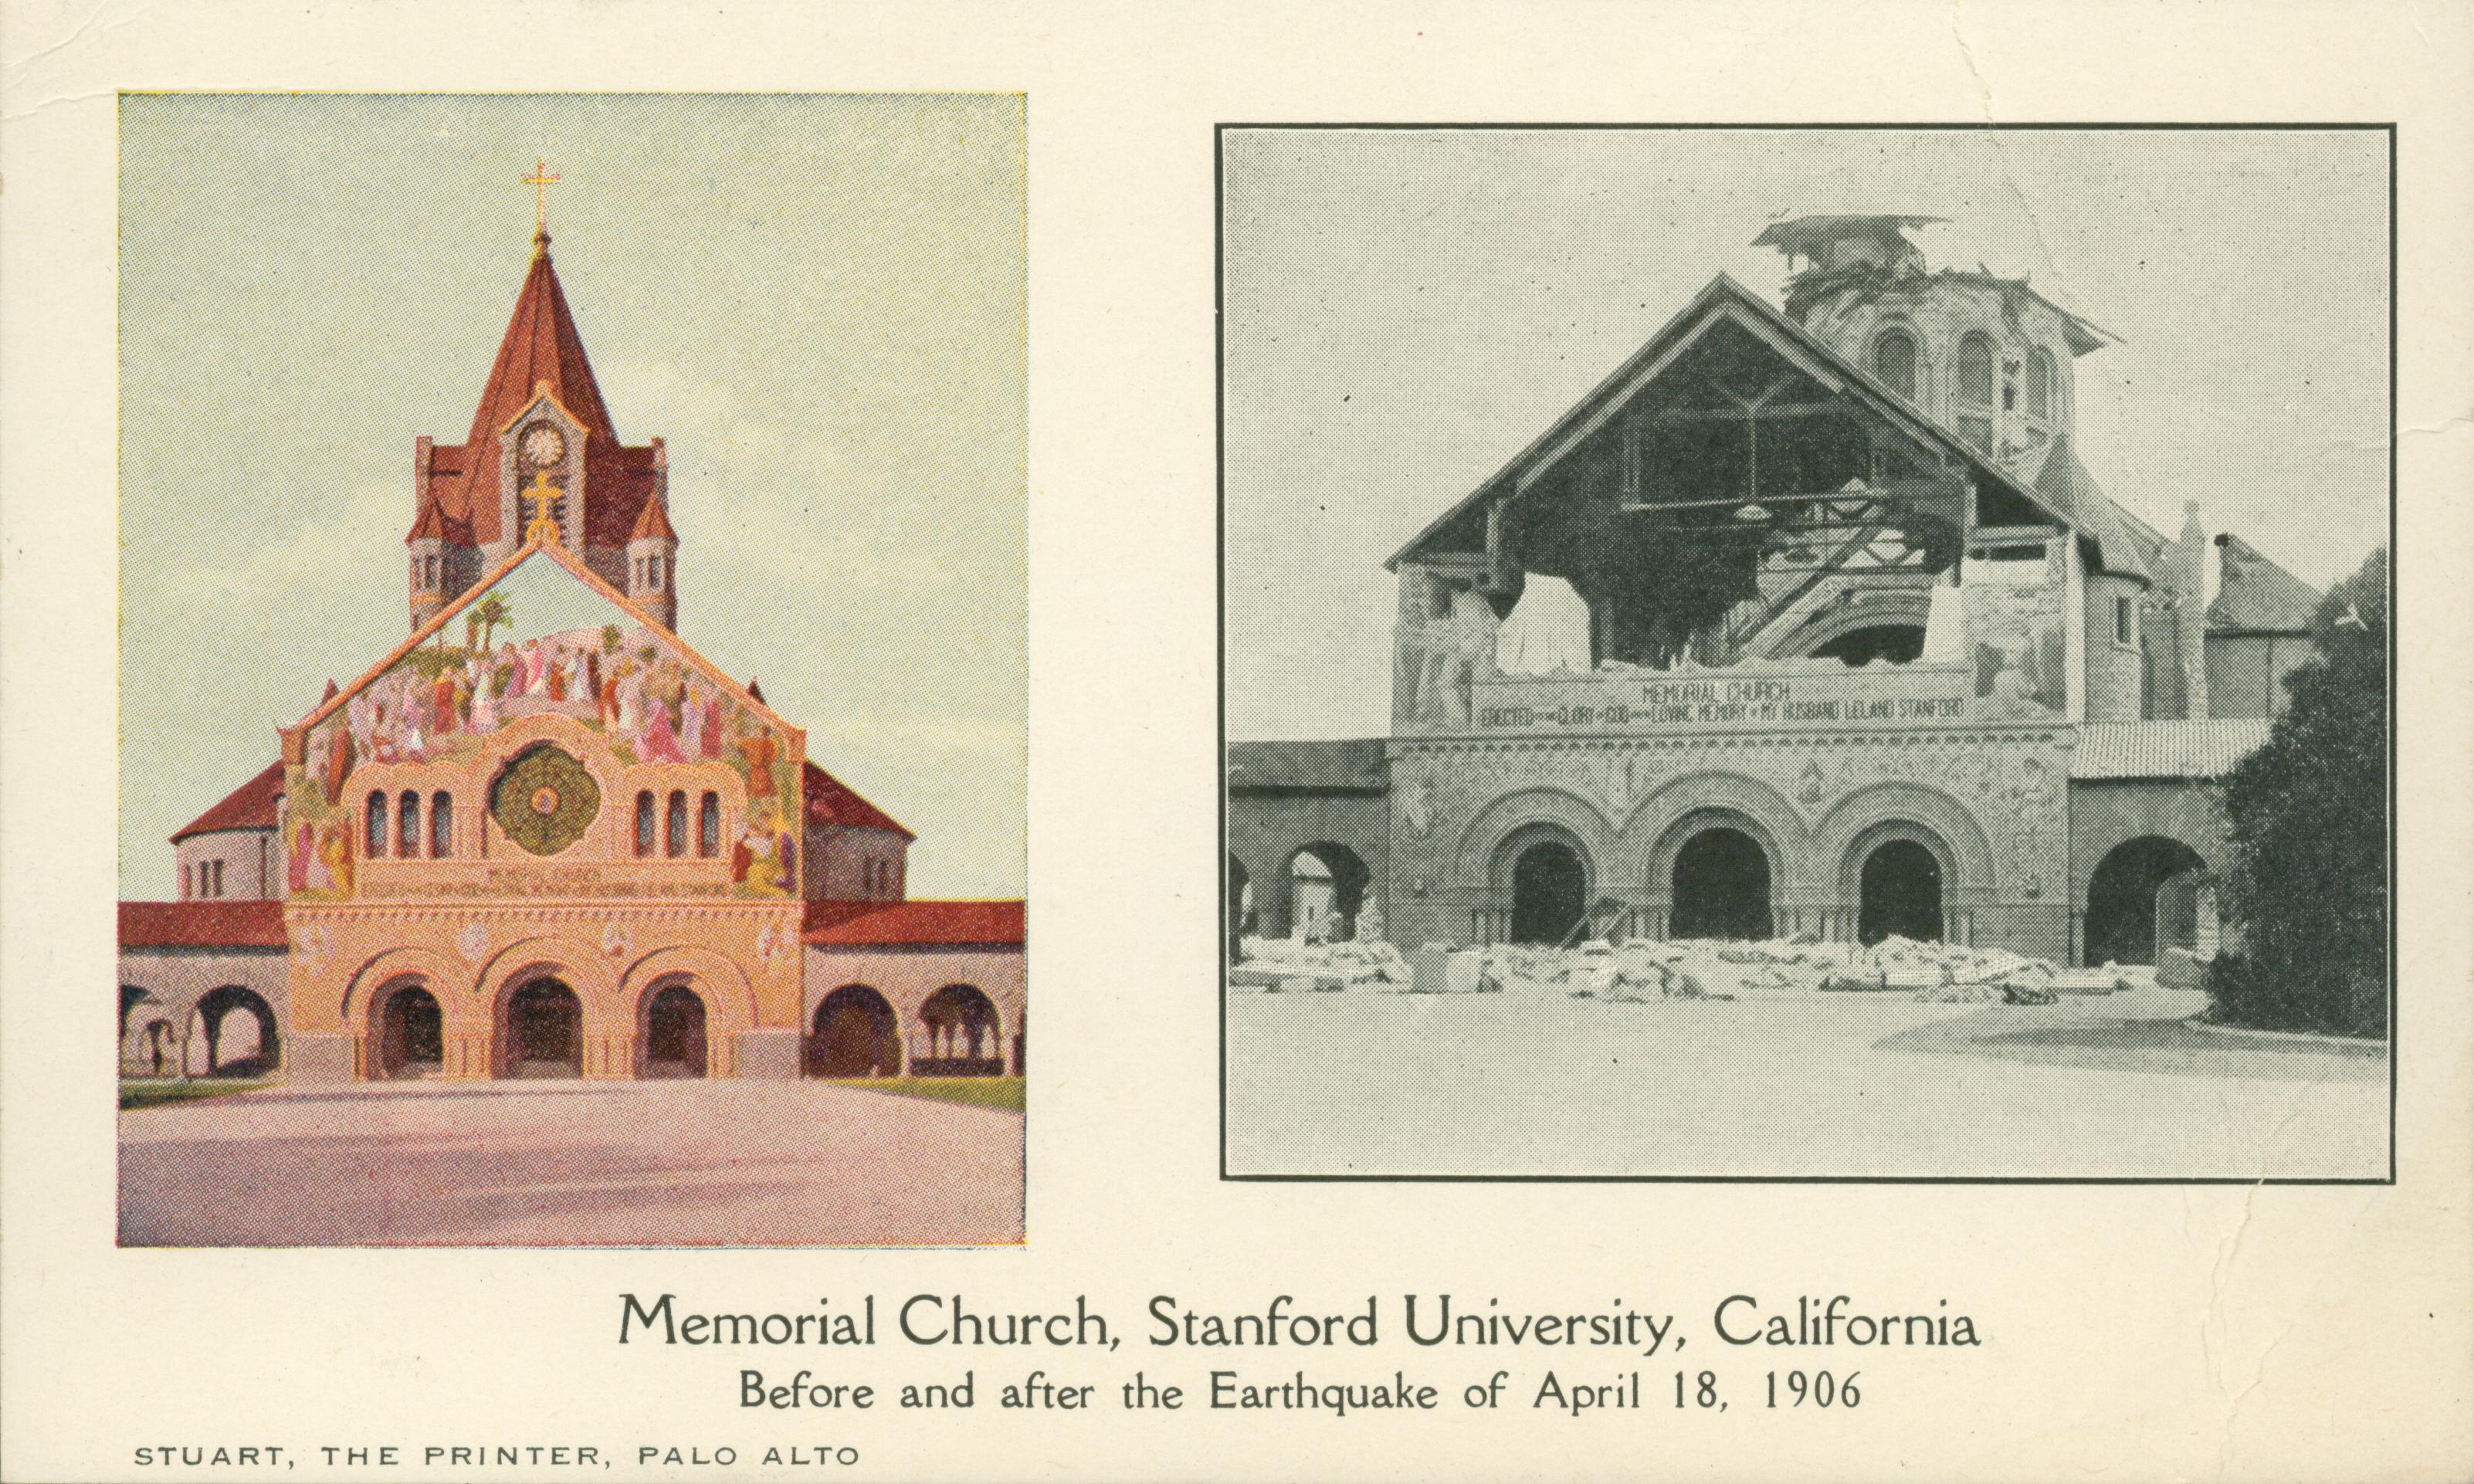 Comparison views of the Memorial Church before and after the earthquake